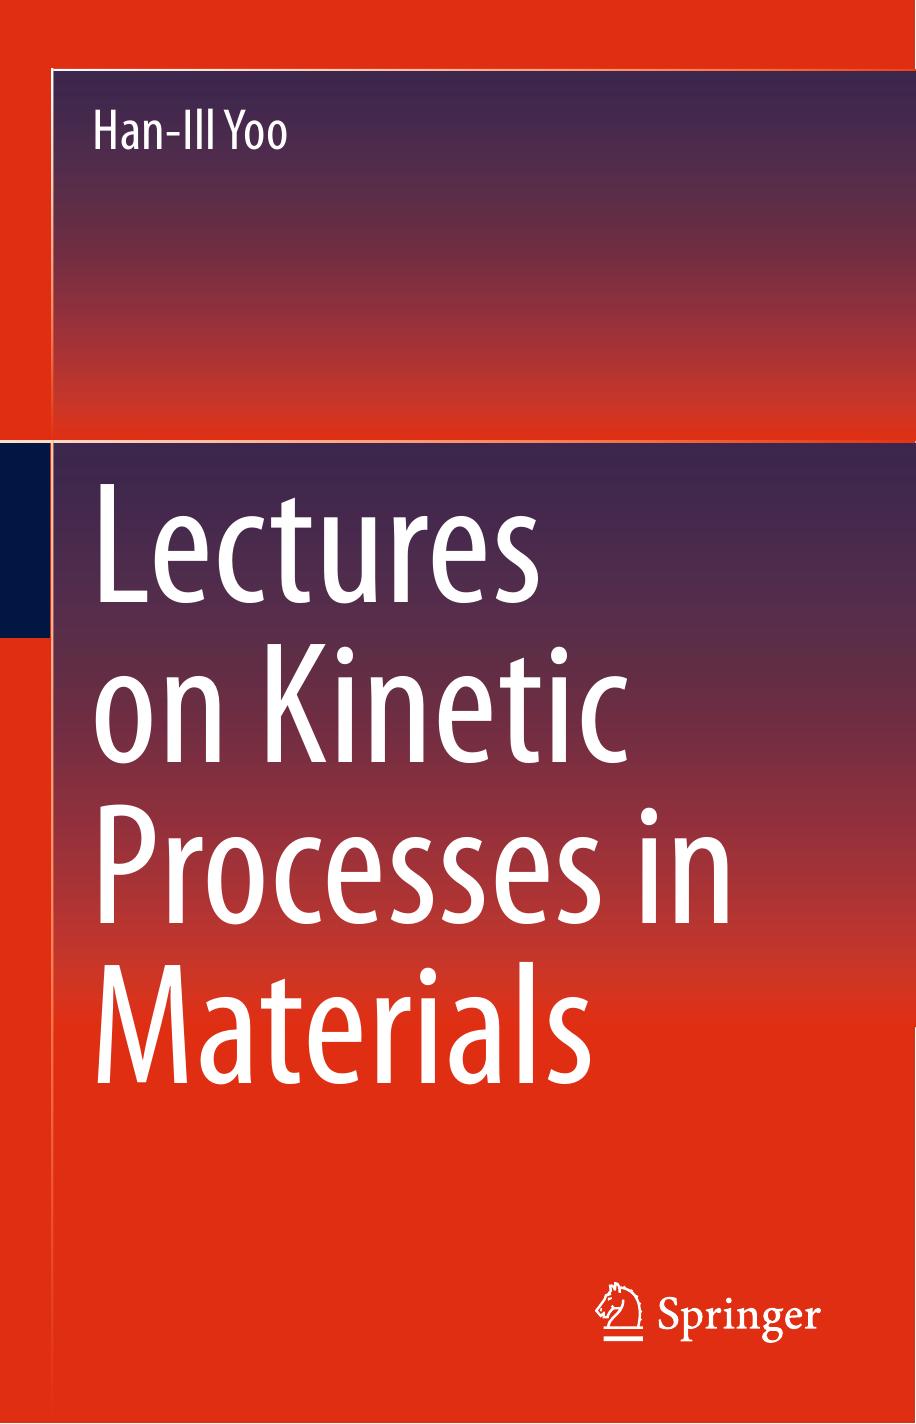 Lectures on Kinetic Processes in Materials by Han-Ill Yoo